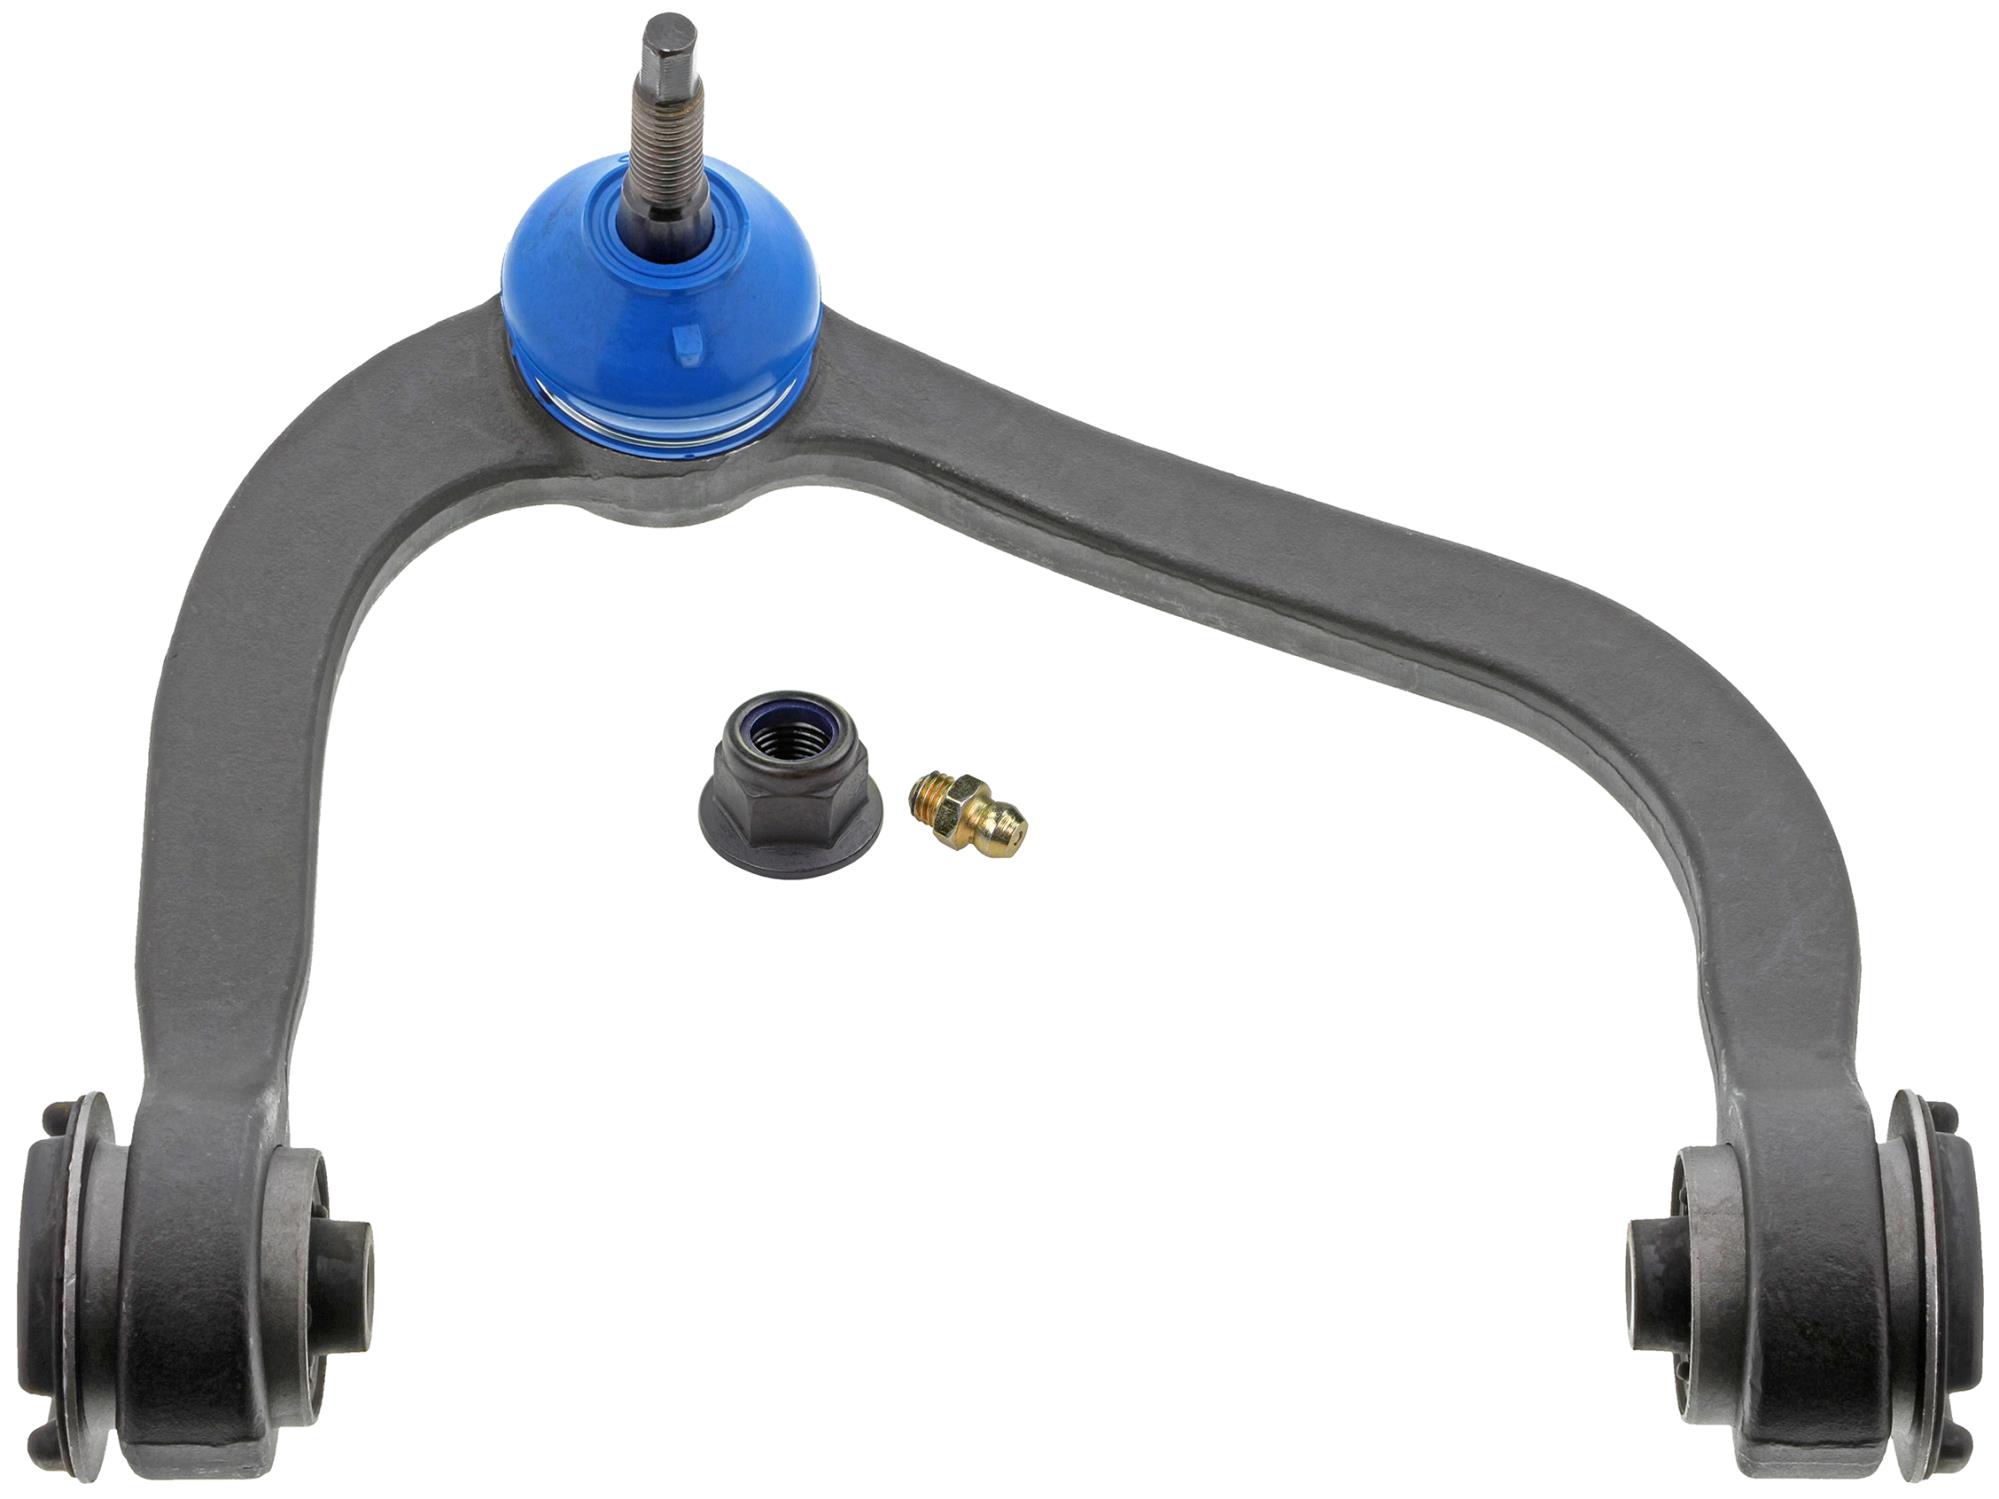 Find the best auto part for your vehicle: Shop perfect fitment Mevotech Supreme control arms from us at the best prices.